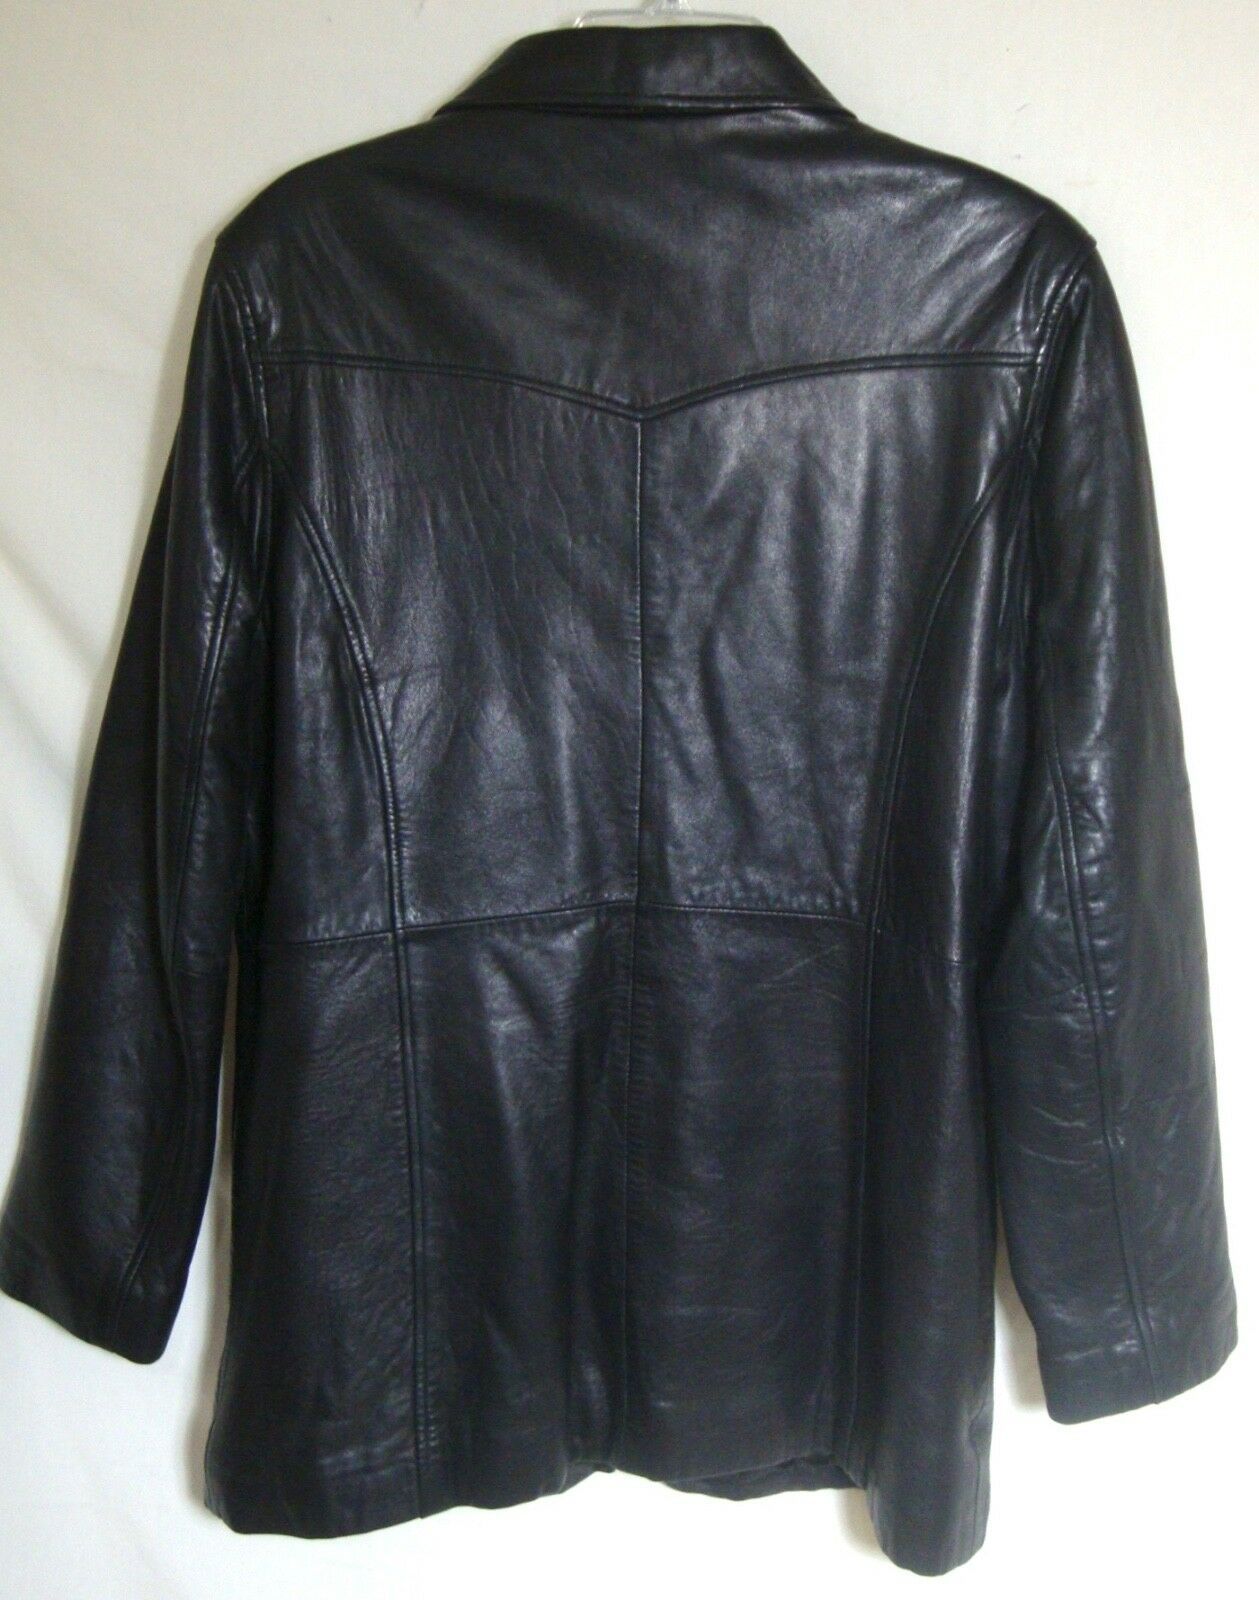 Bianca Nygard Luxe Soft Black Leather Car Coat Zip Up Jacket Lined ...